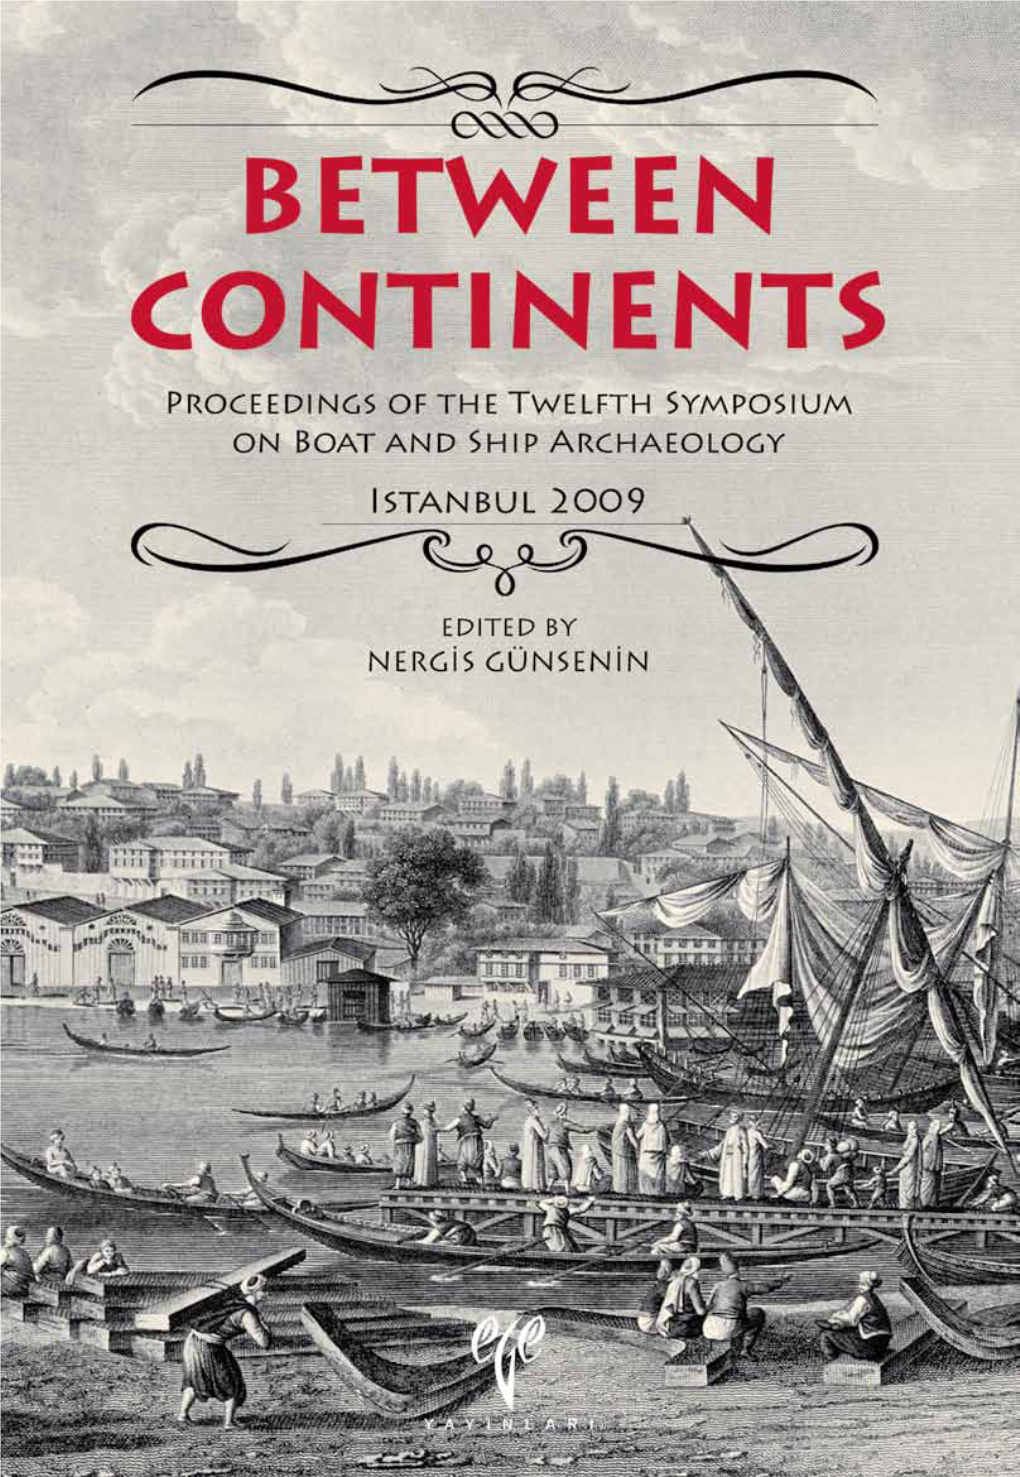 BETWEEN CONTINENTS Proceedings of the Twelfth Symposium on Boat and Ship Archaeology Istanbul 2009